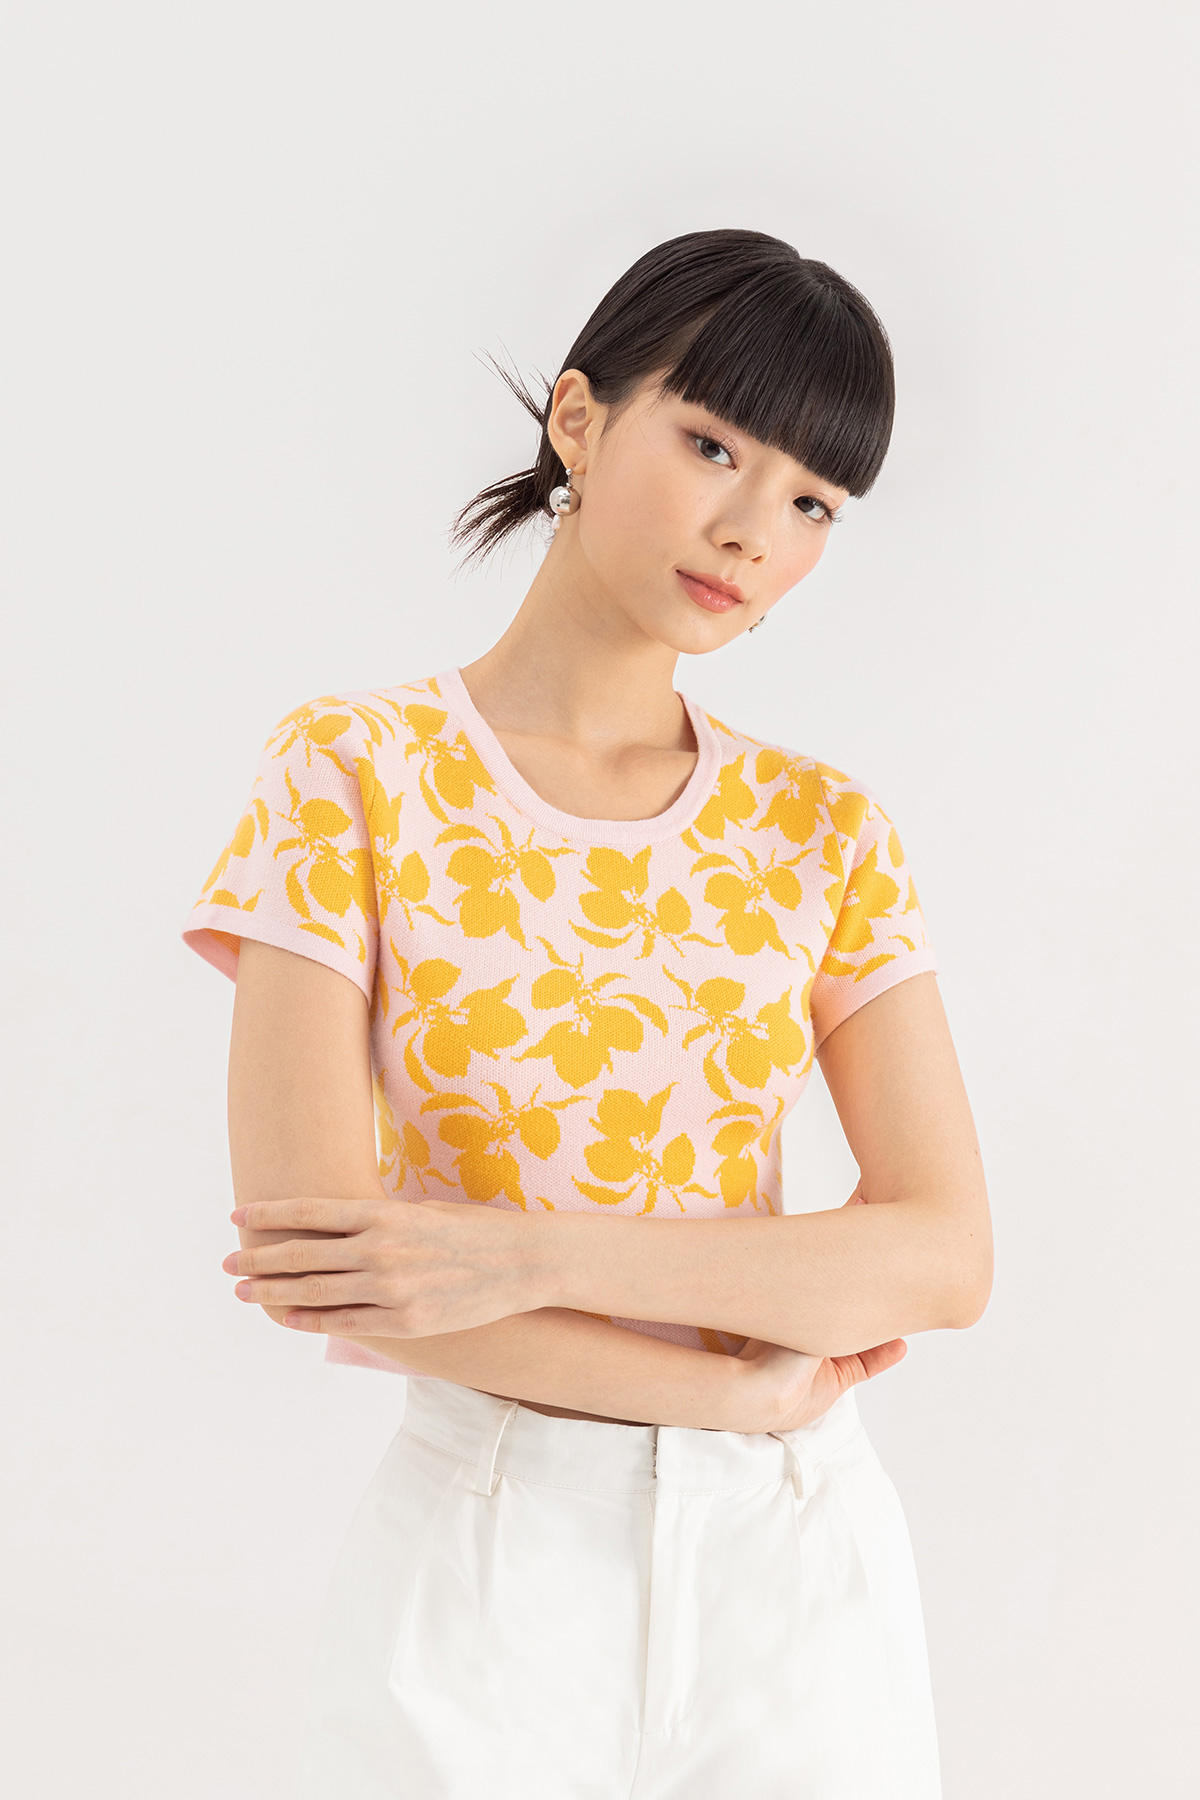 *SALE* FELICITE TOP - LIMONATA [BY MODPARADE]